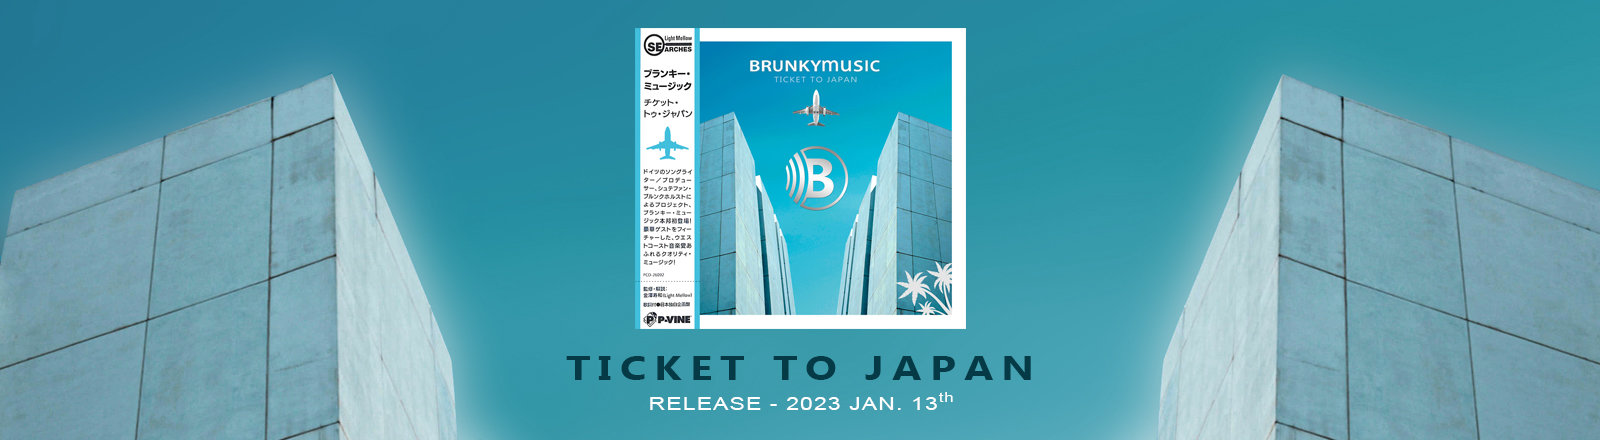 Brunky Music „Ticket to Japan“ - Japan exclusive album compilation release